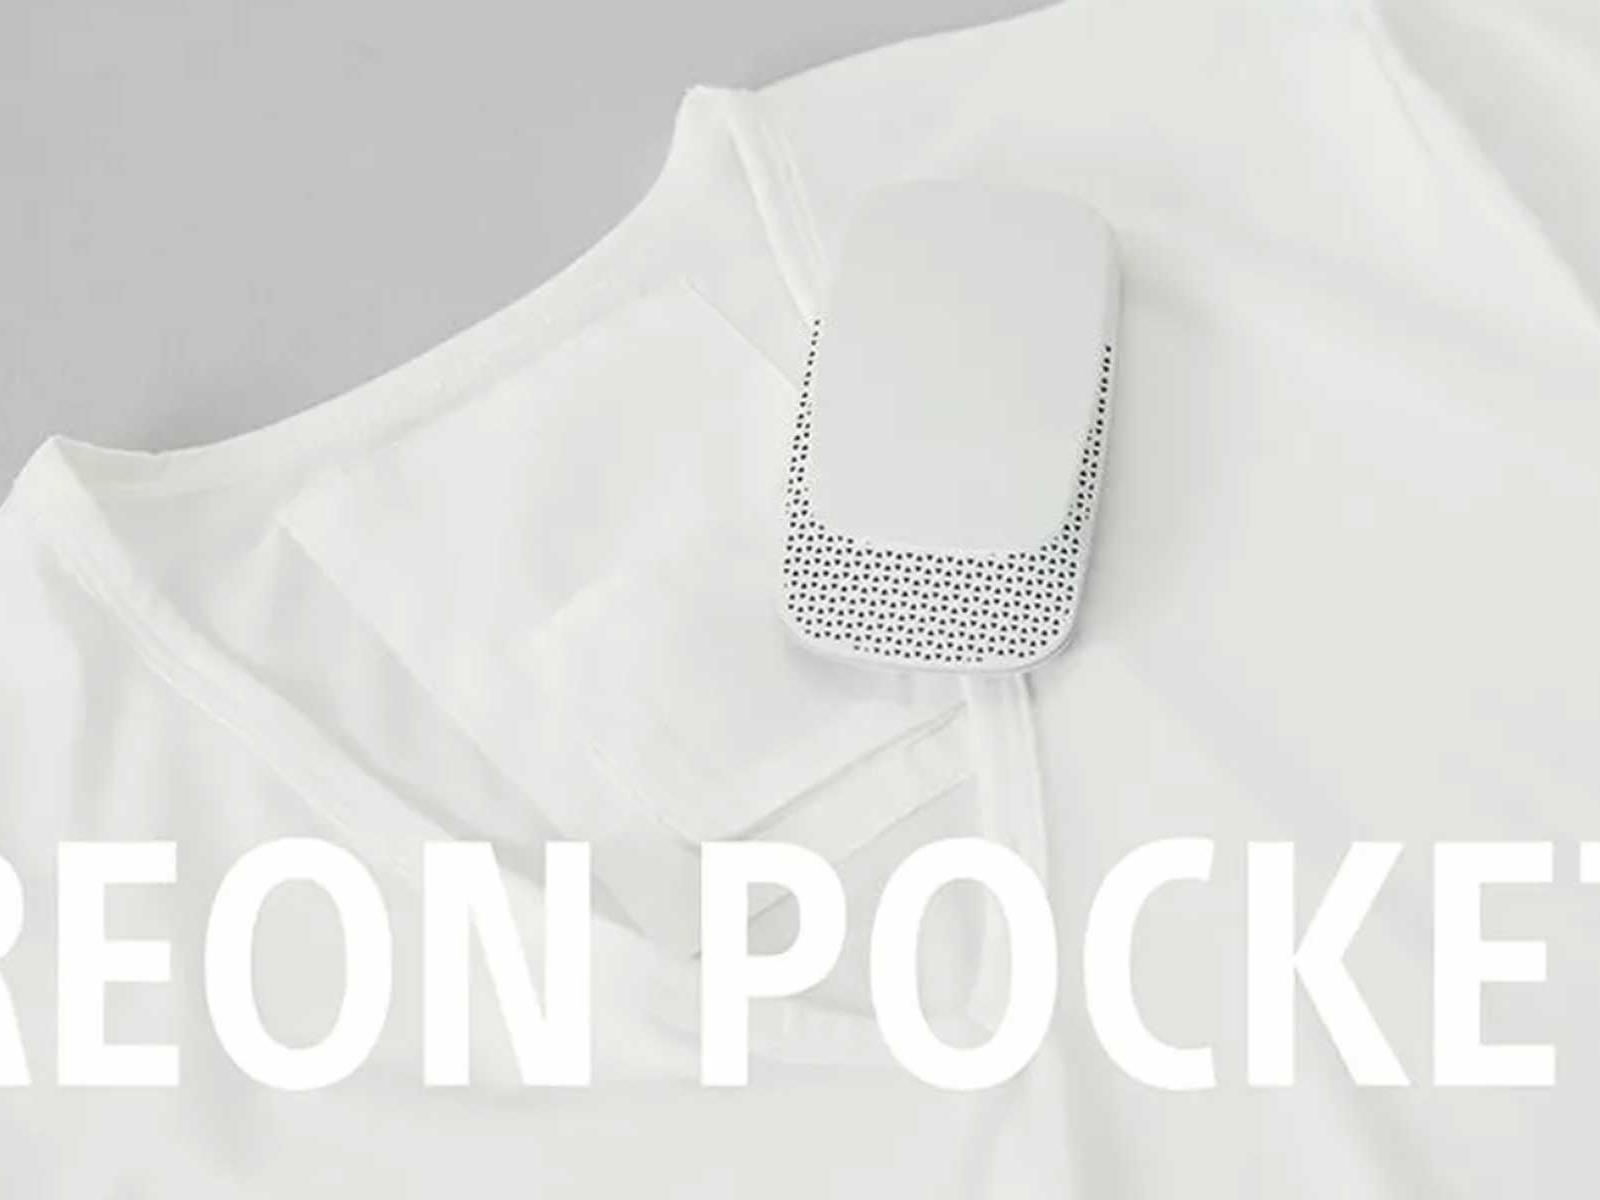 Sony Reon Pocket: A Cool Wearable Air Conditioner You Control